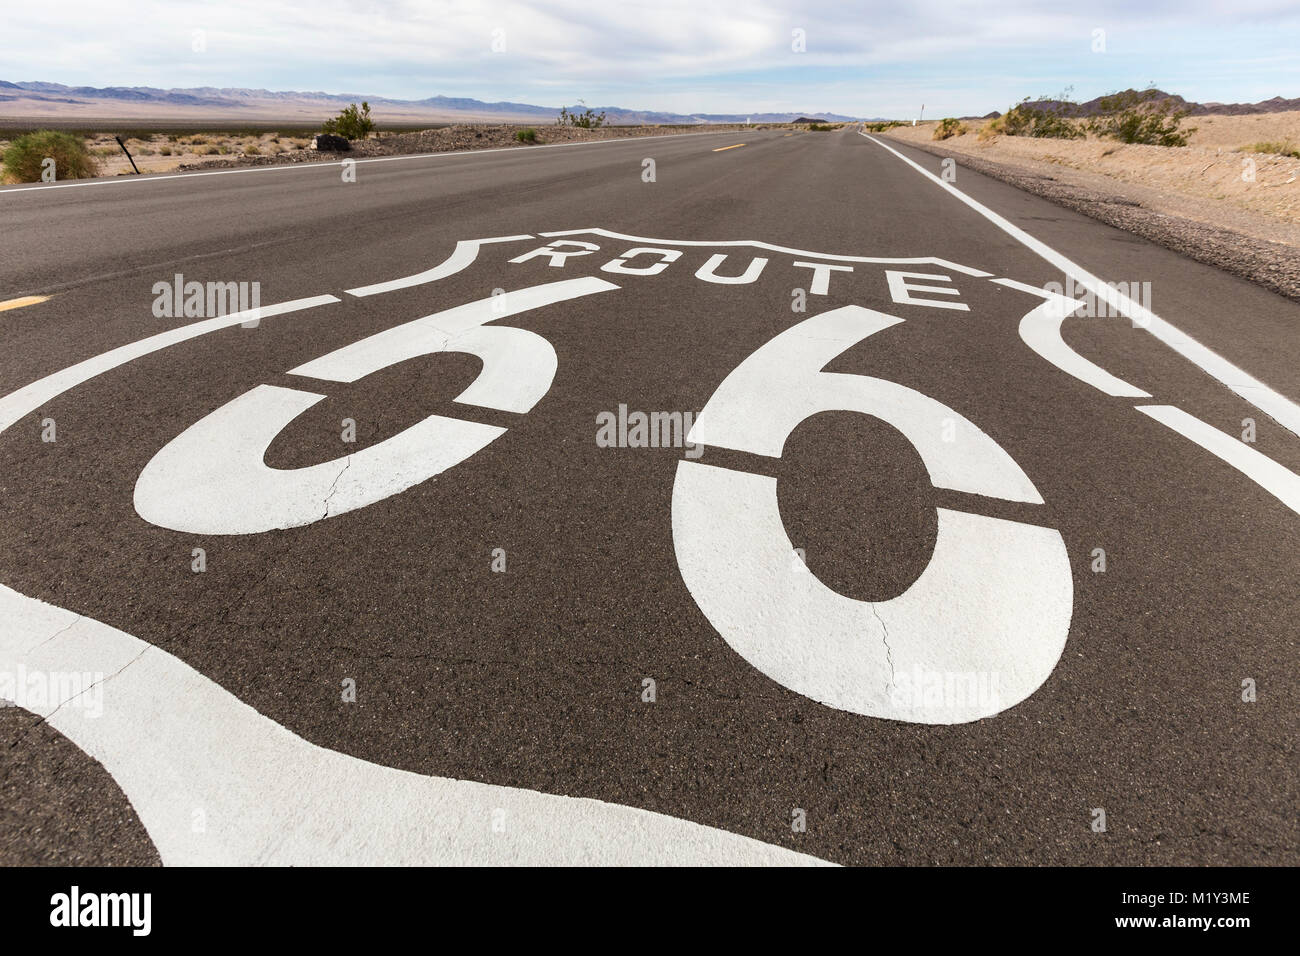 Route 66 pavement sign near Amboy in the California Mojave desert. Stock Photo